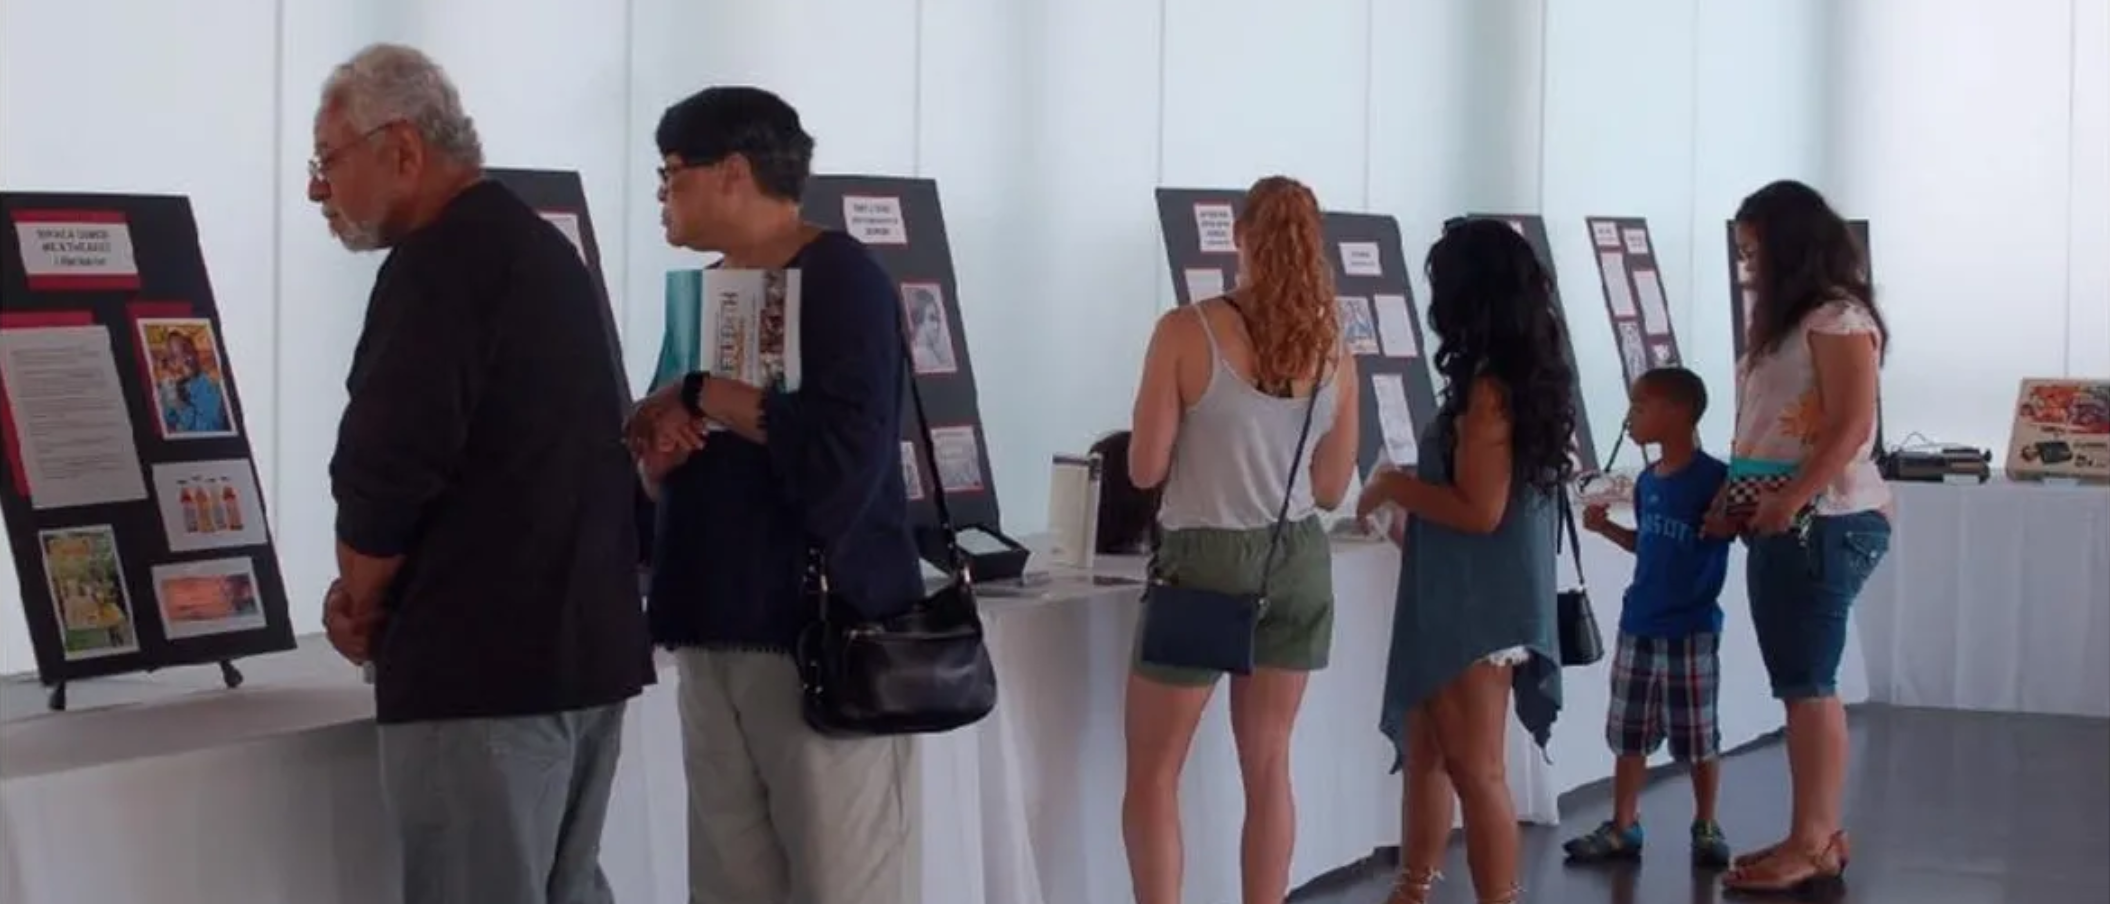 Group of people looking at traveling exhibit